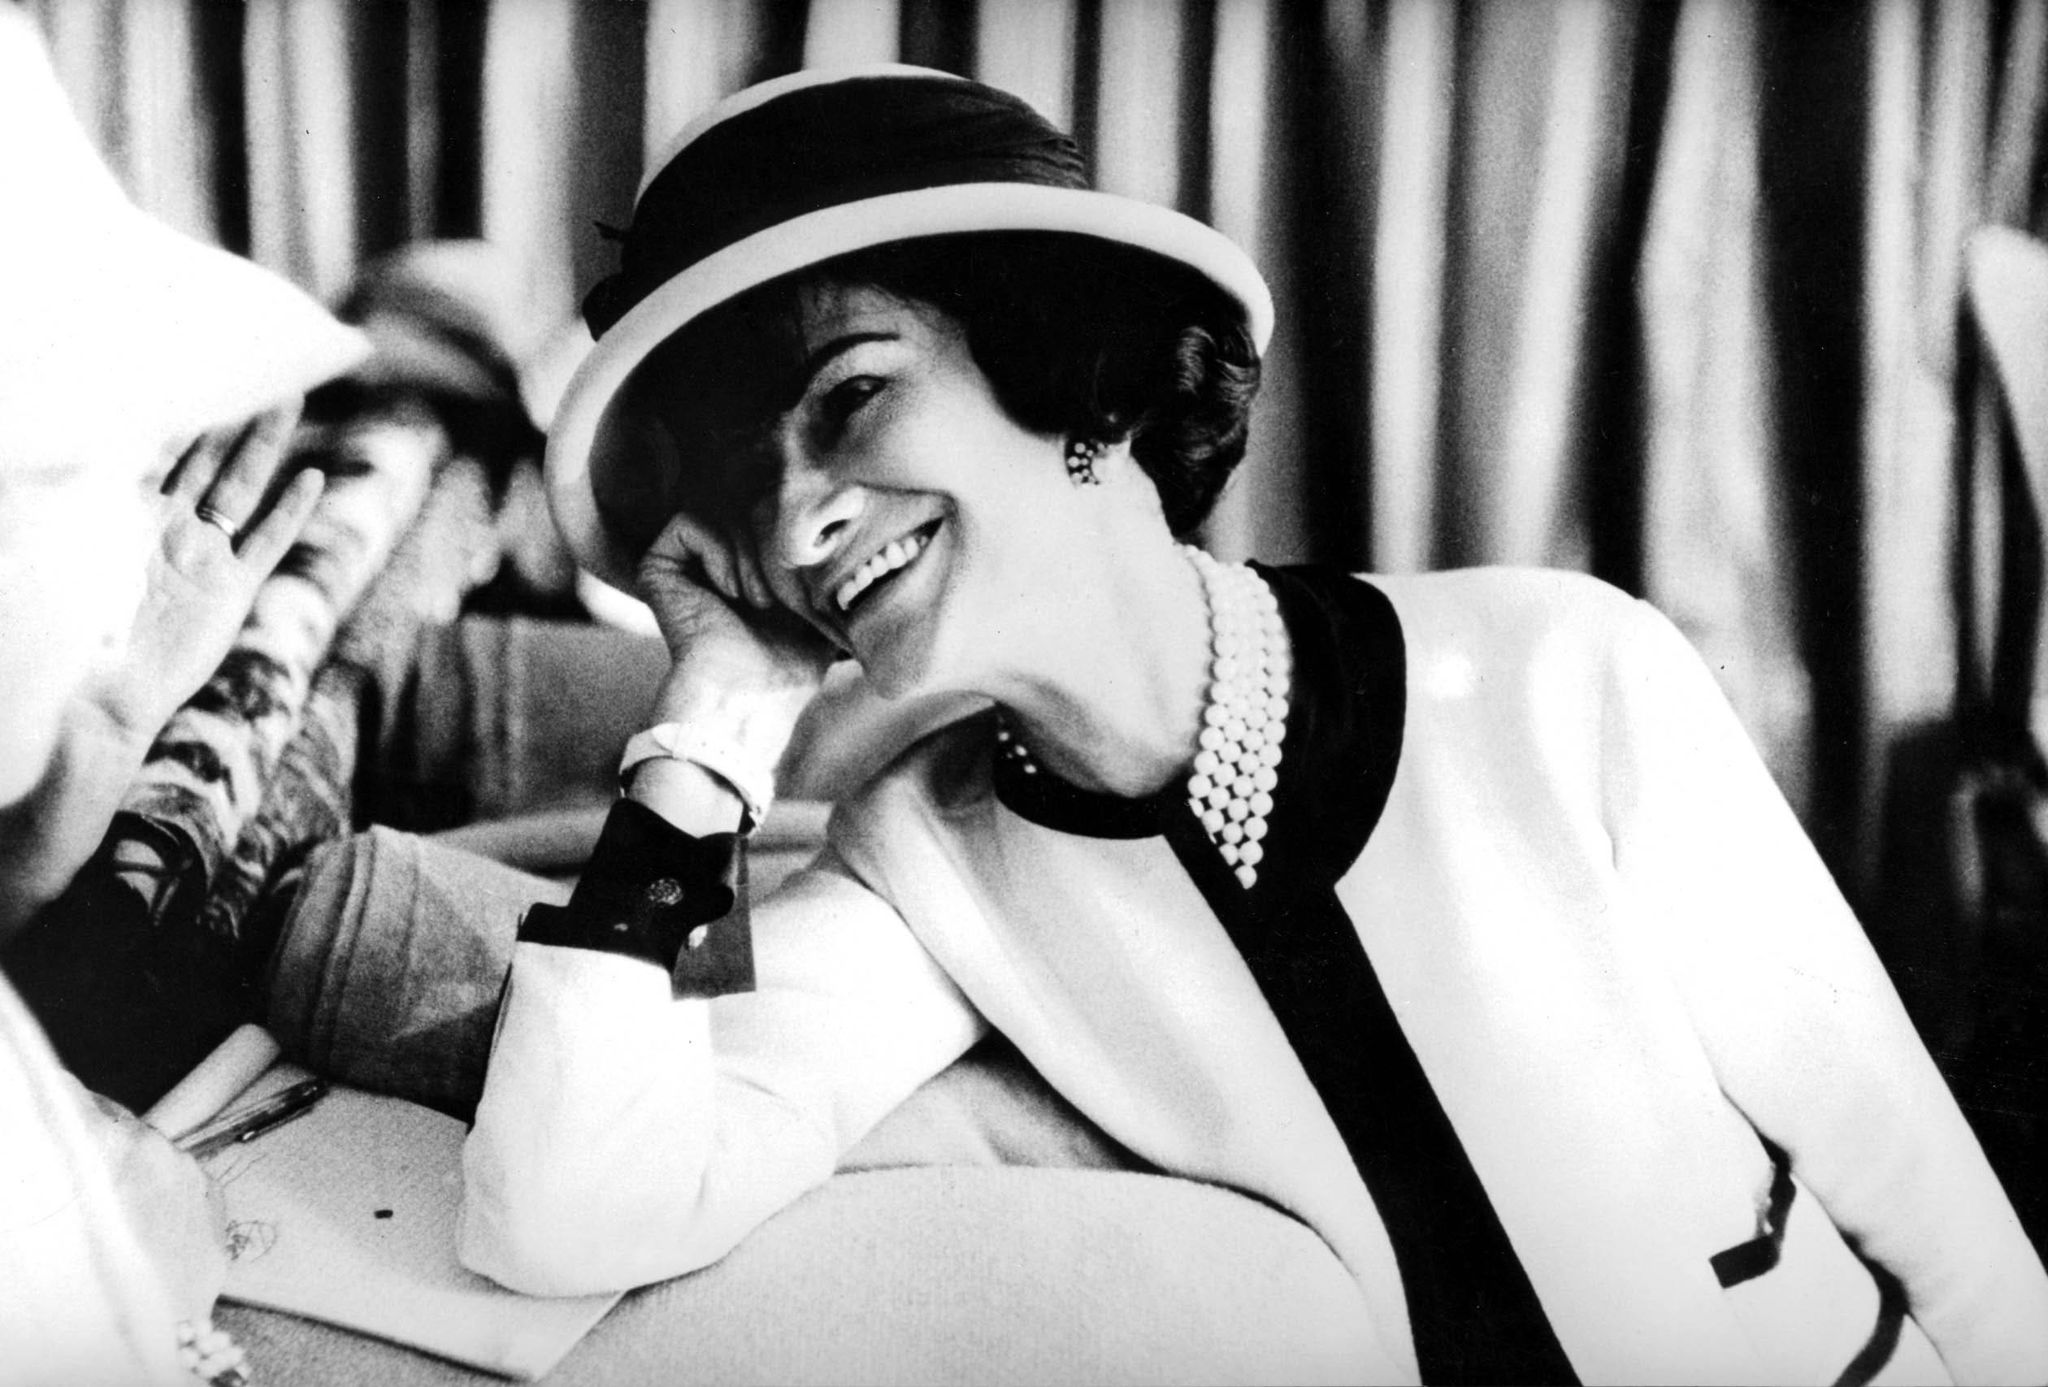 More than 200 looks to feature in V&A exhibition on Gabrielle 'Coco' Chanel